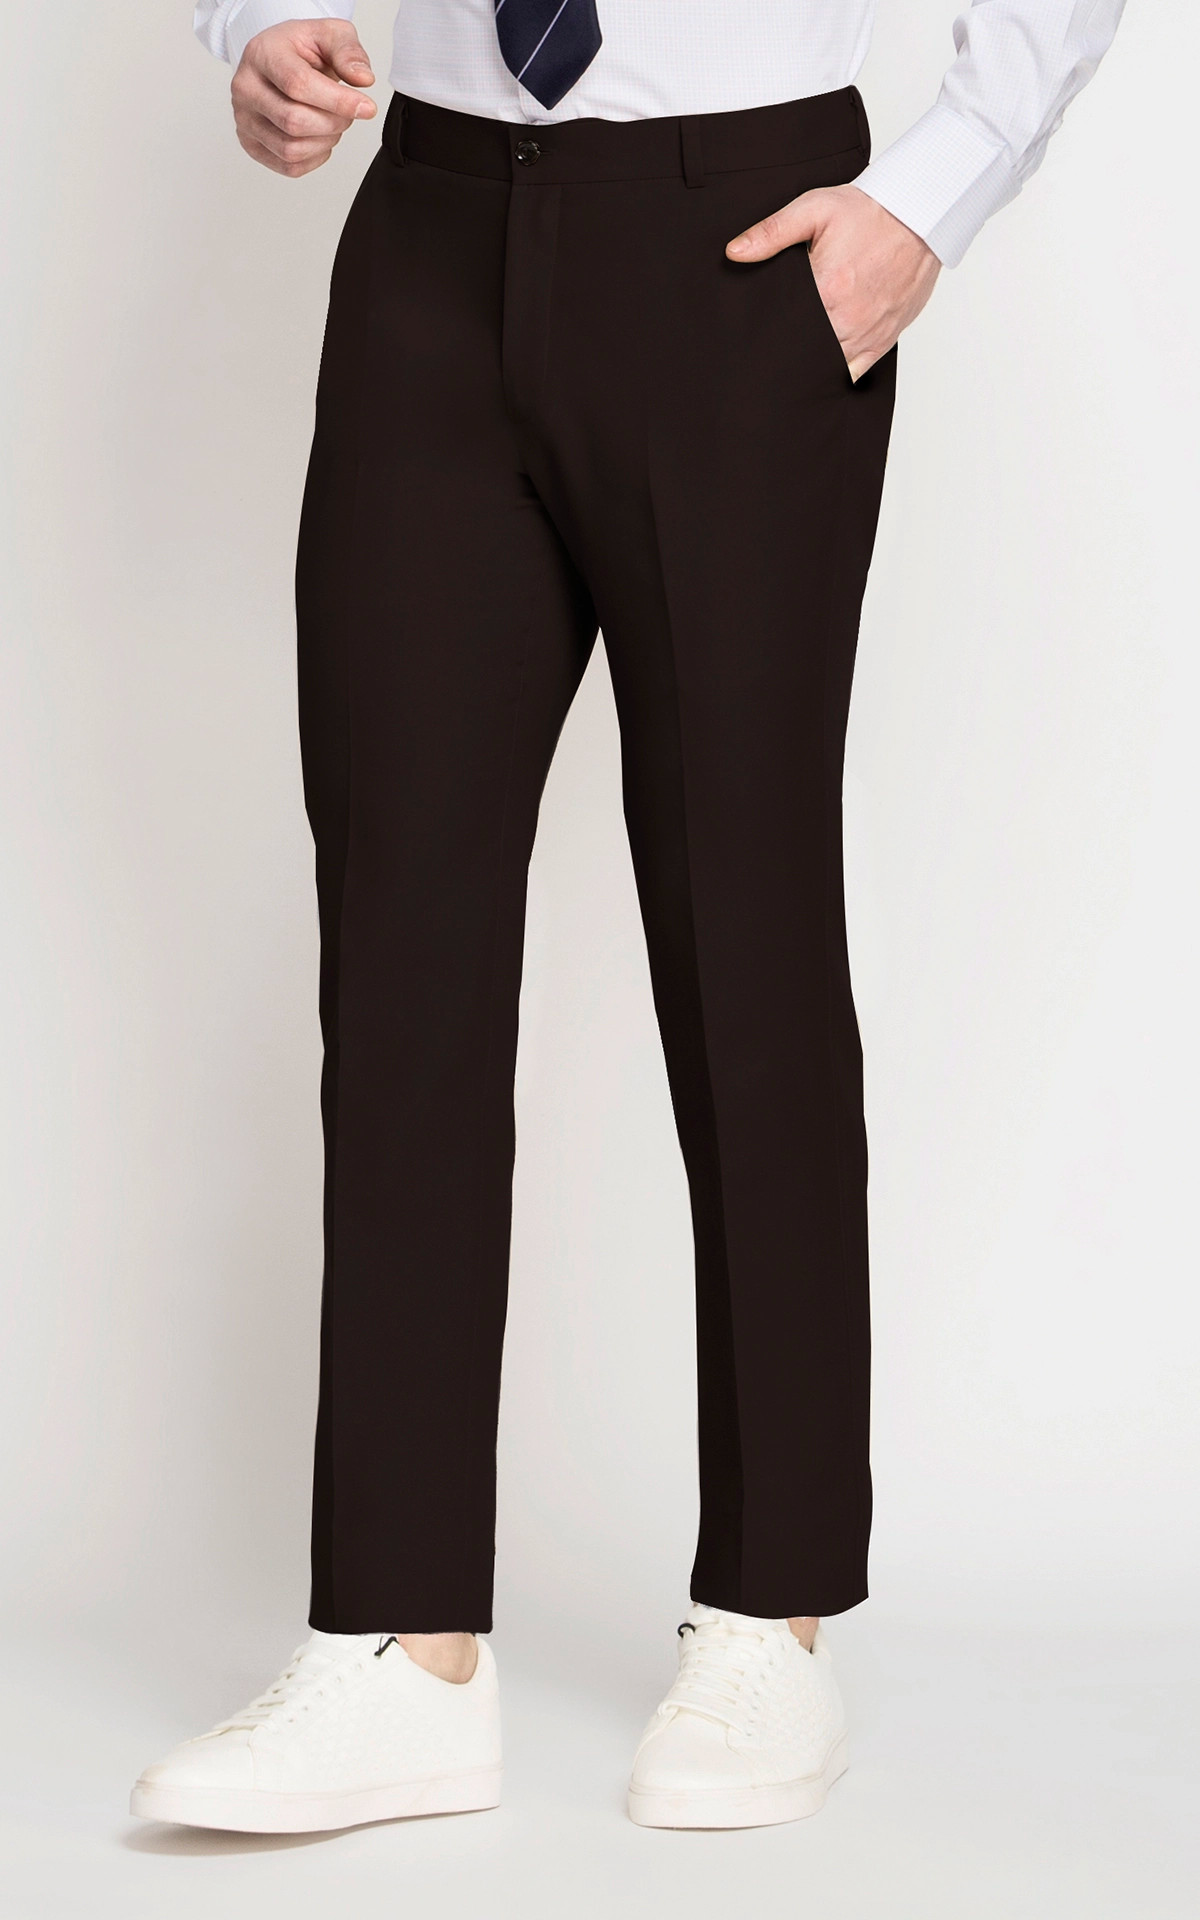 mens fashion shopping Trousers by urbantouch - urban clothing co.